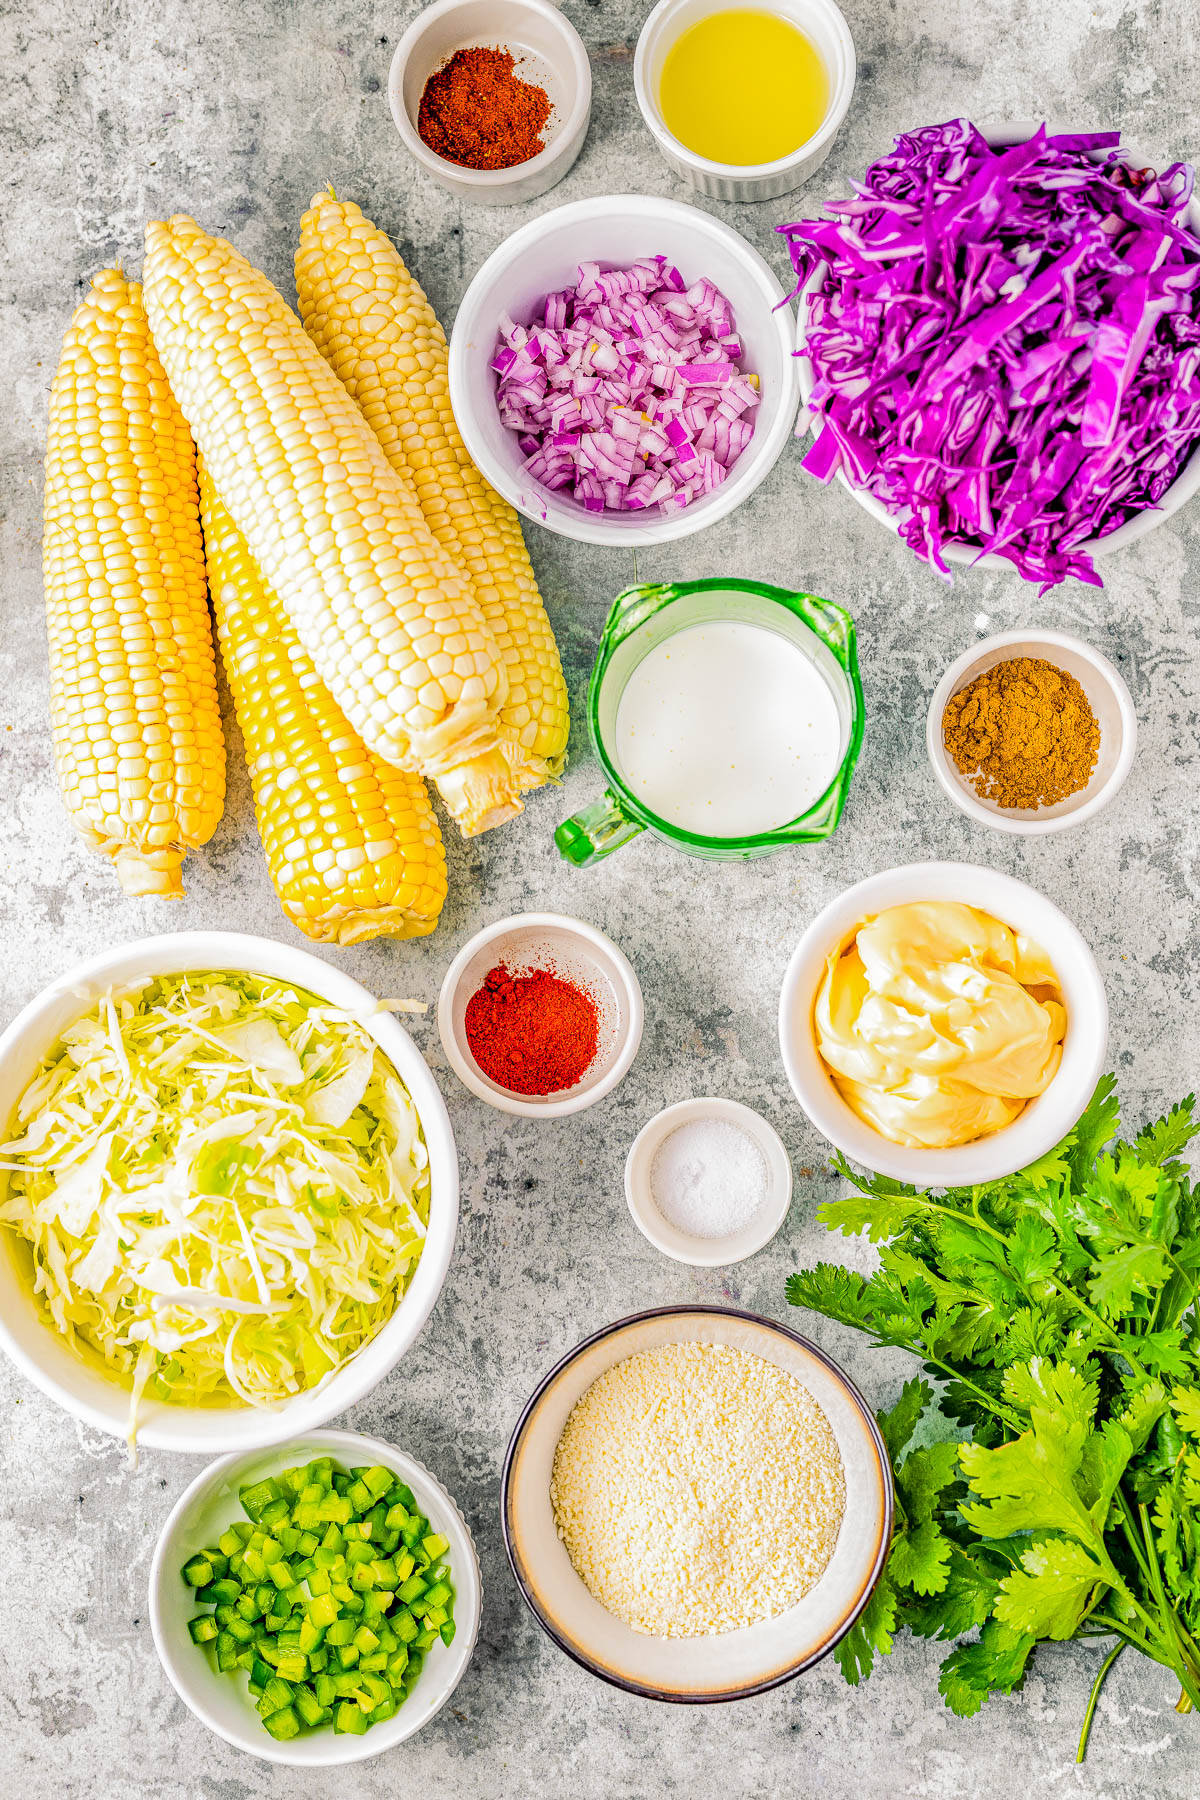 Various fresh ingredients for cooking displayed on a kitchen surface, including corn, purple cabbage, onions, herbs, spices, and oils.